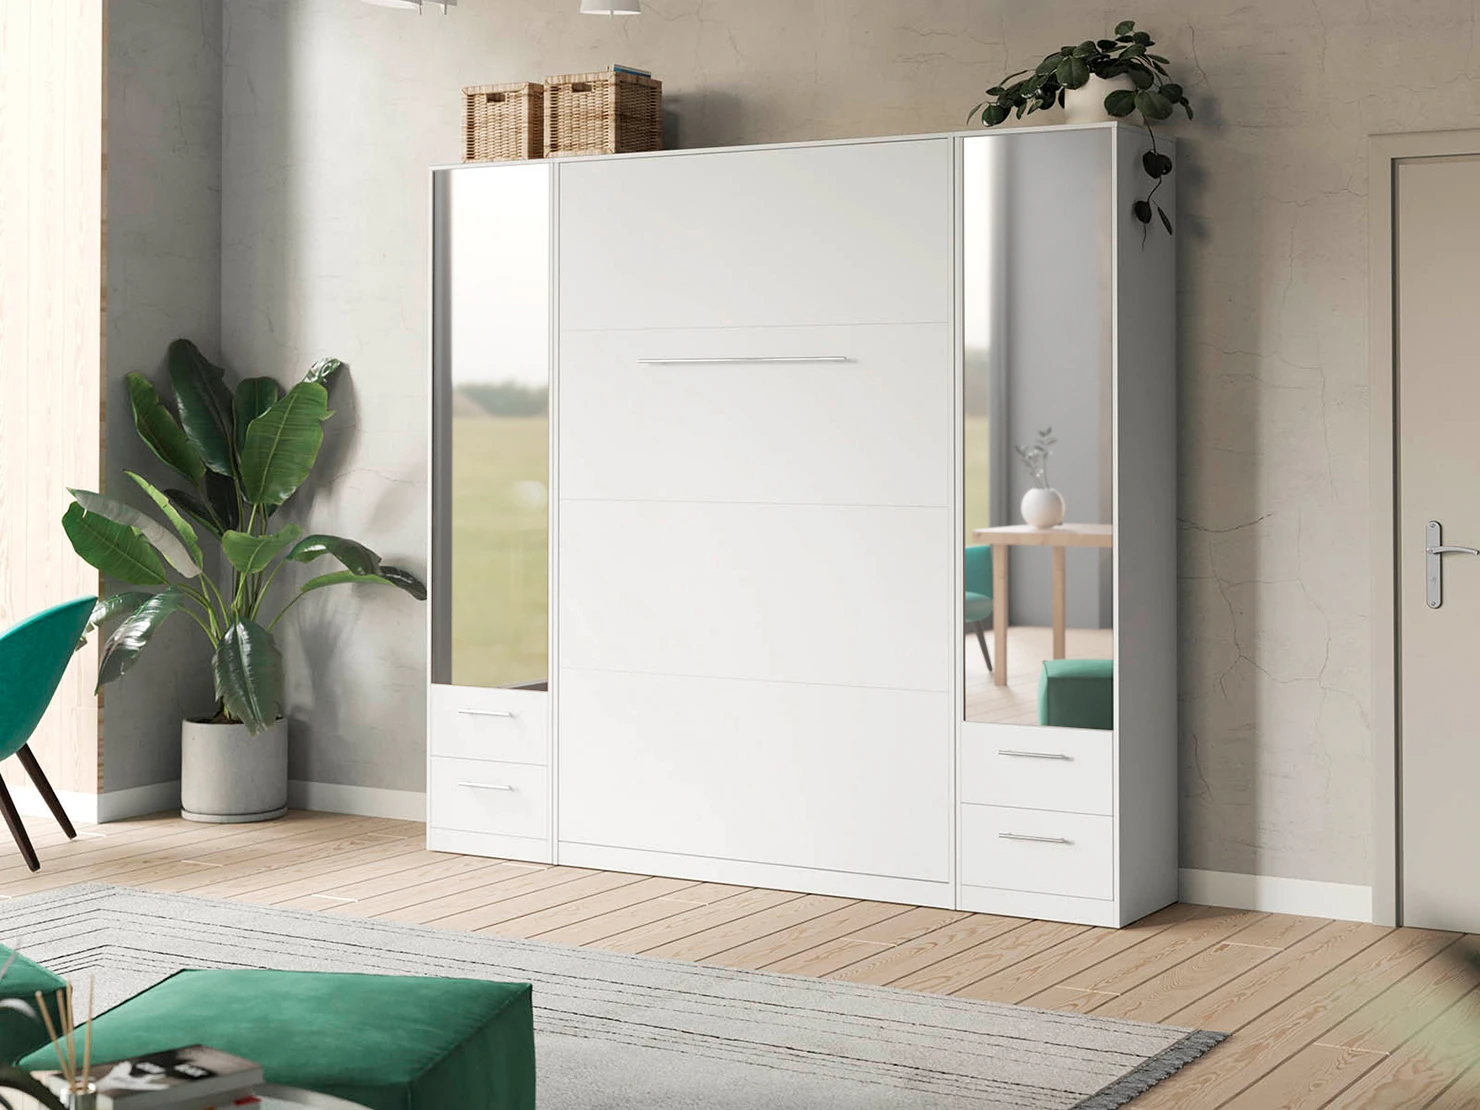 1 Murphy Bed SET 140x200cm Vertical + 2x Cabinets 50cm White/White with Mirror